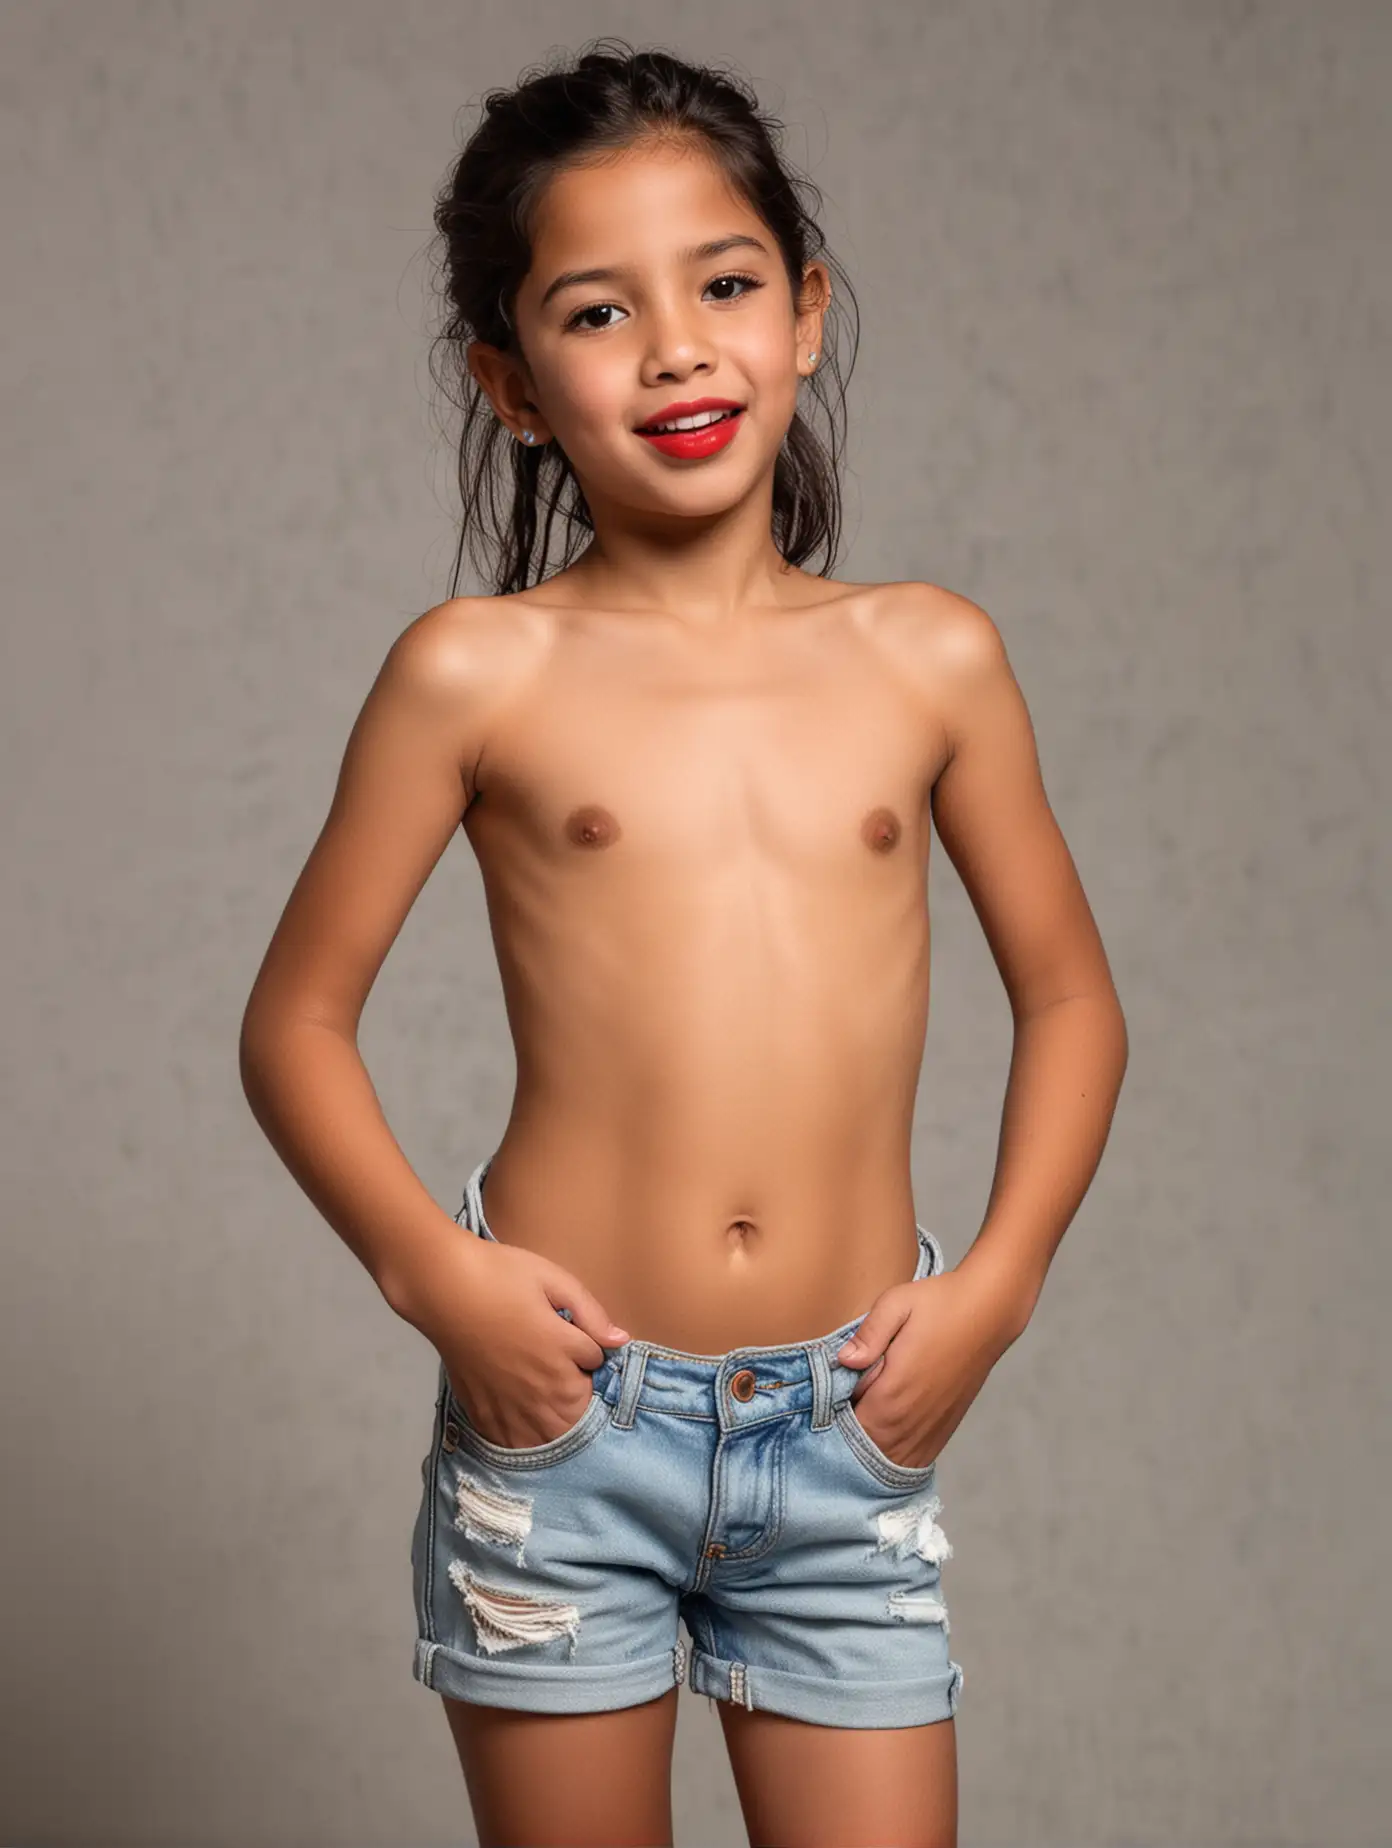 TenYearOld-Latina-Girl-with-Red-Lipstick-in-a-Confident-Pose